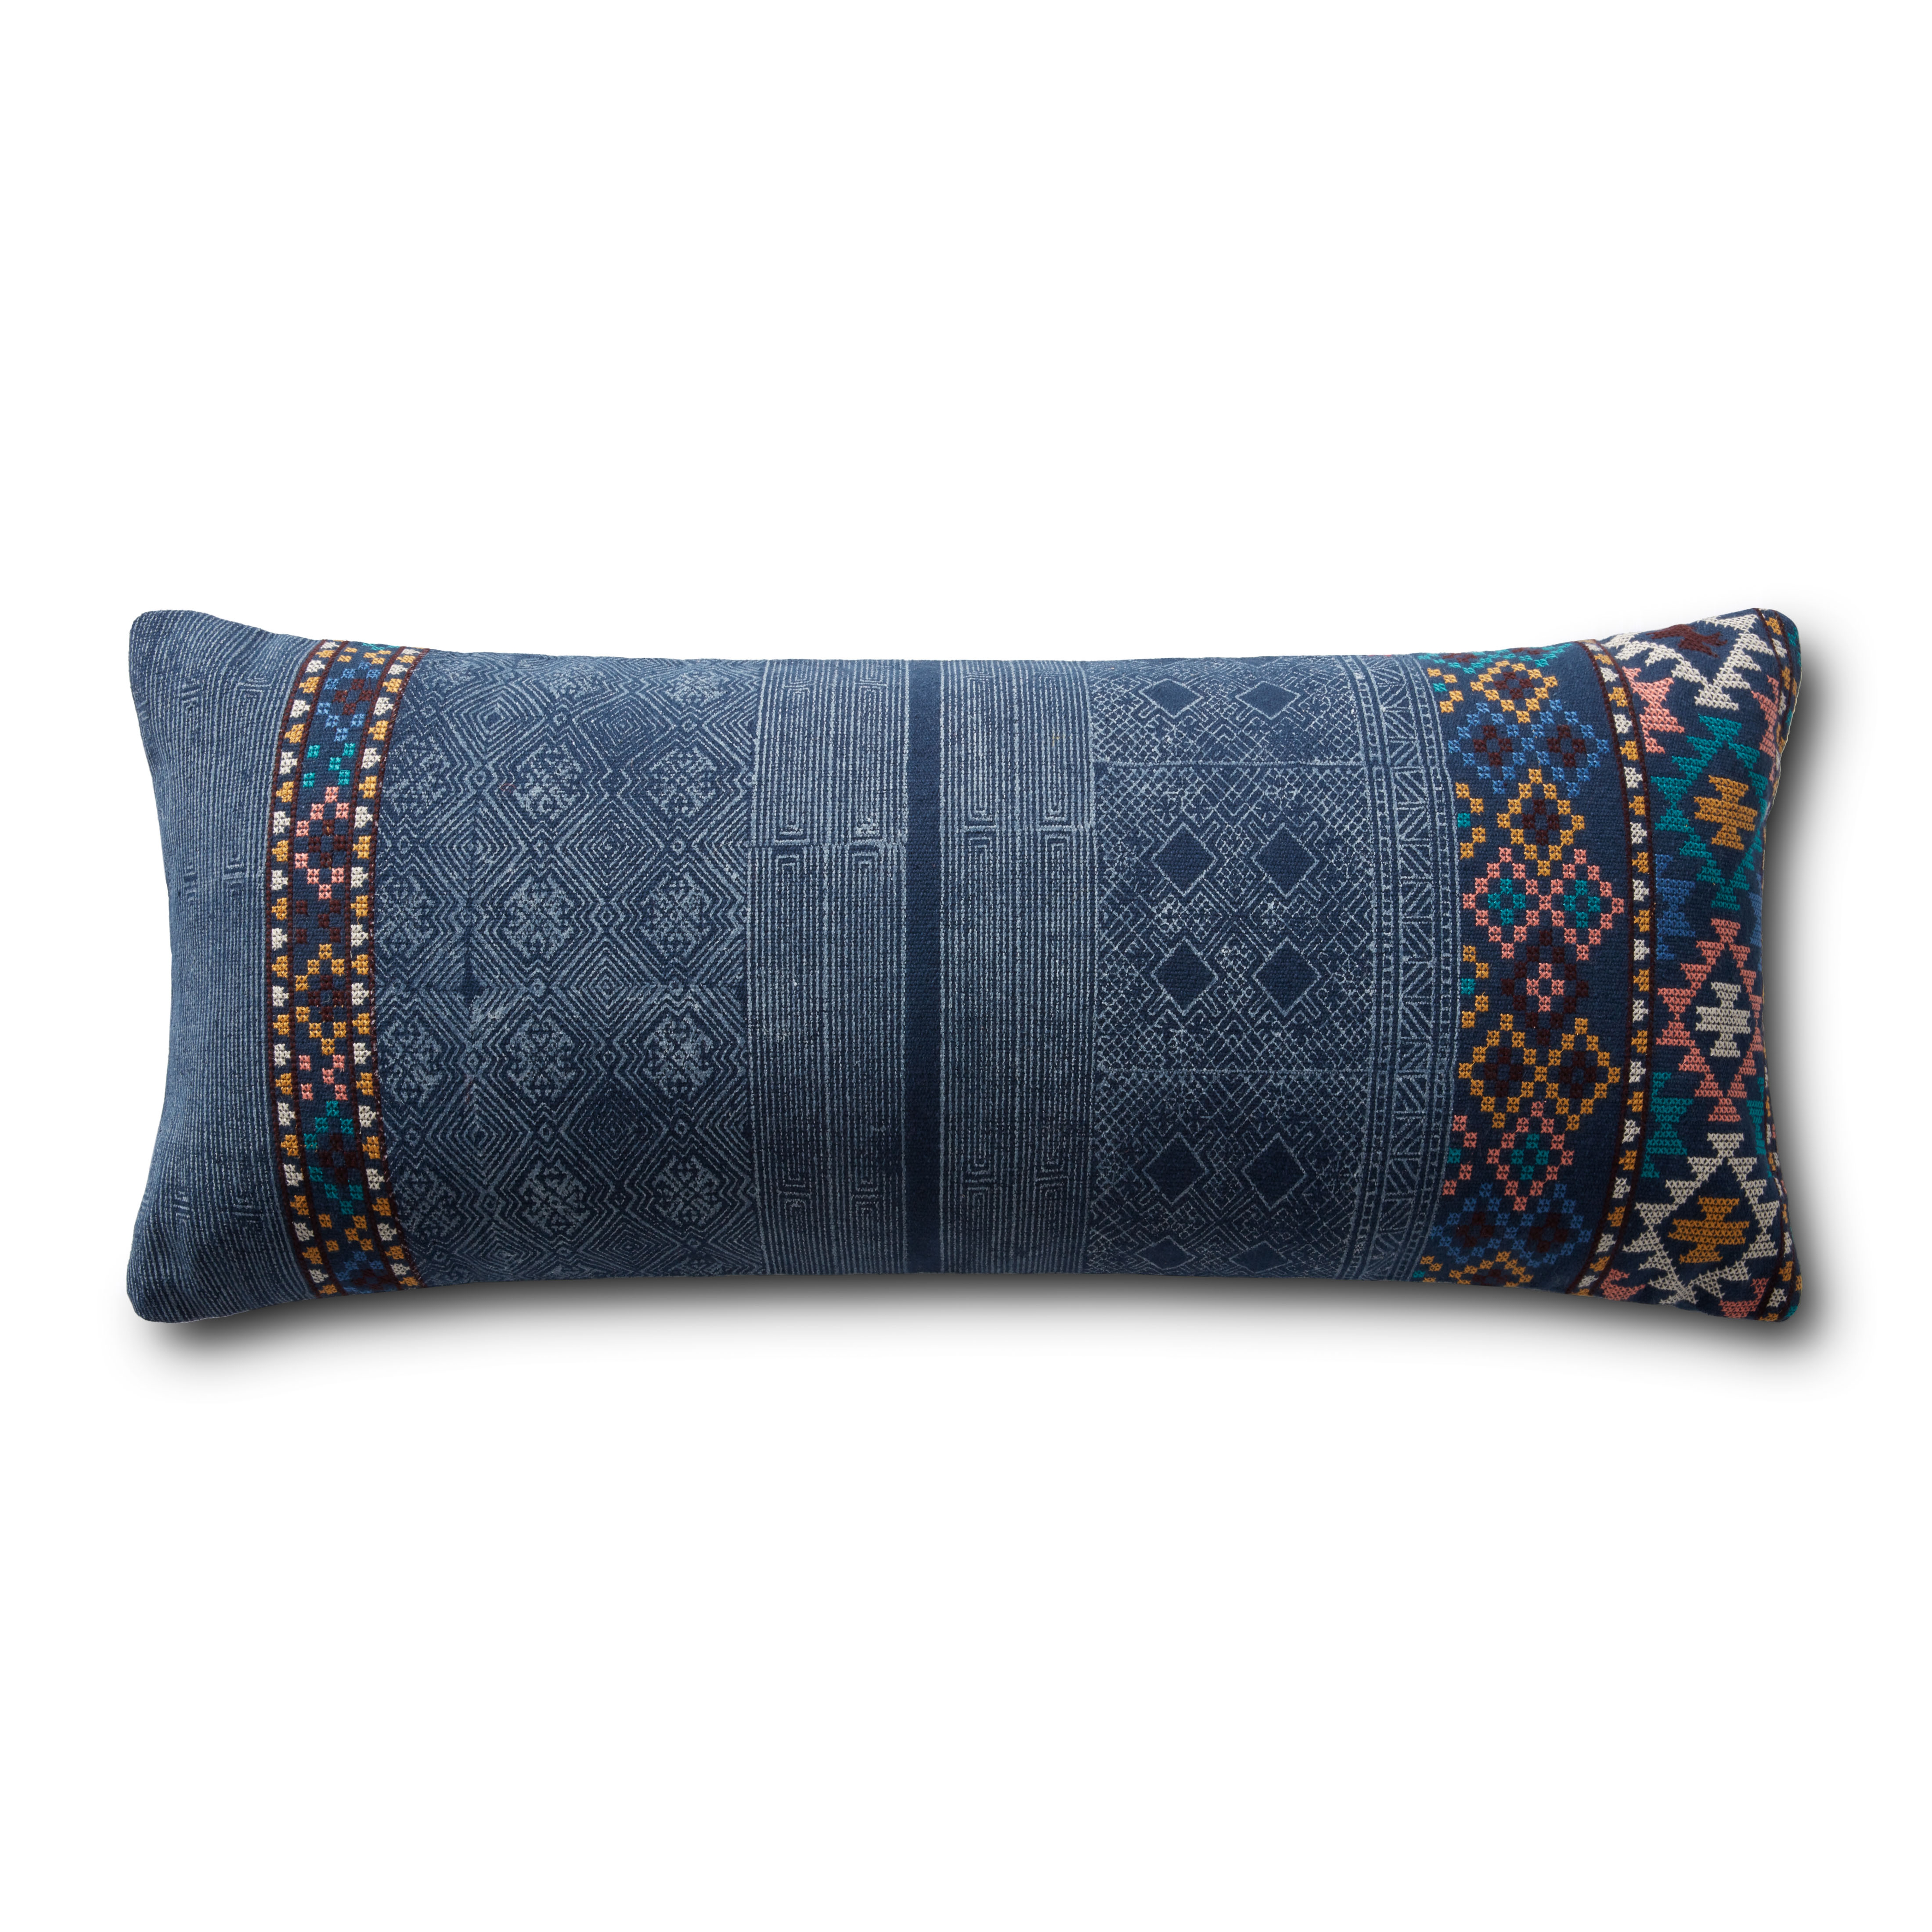 PILLOWS P0969 NAVY / MULTI 13" x 35" Cover w/Down - Loloi Rugs